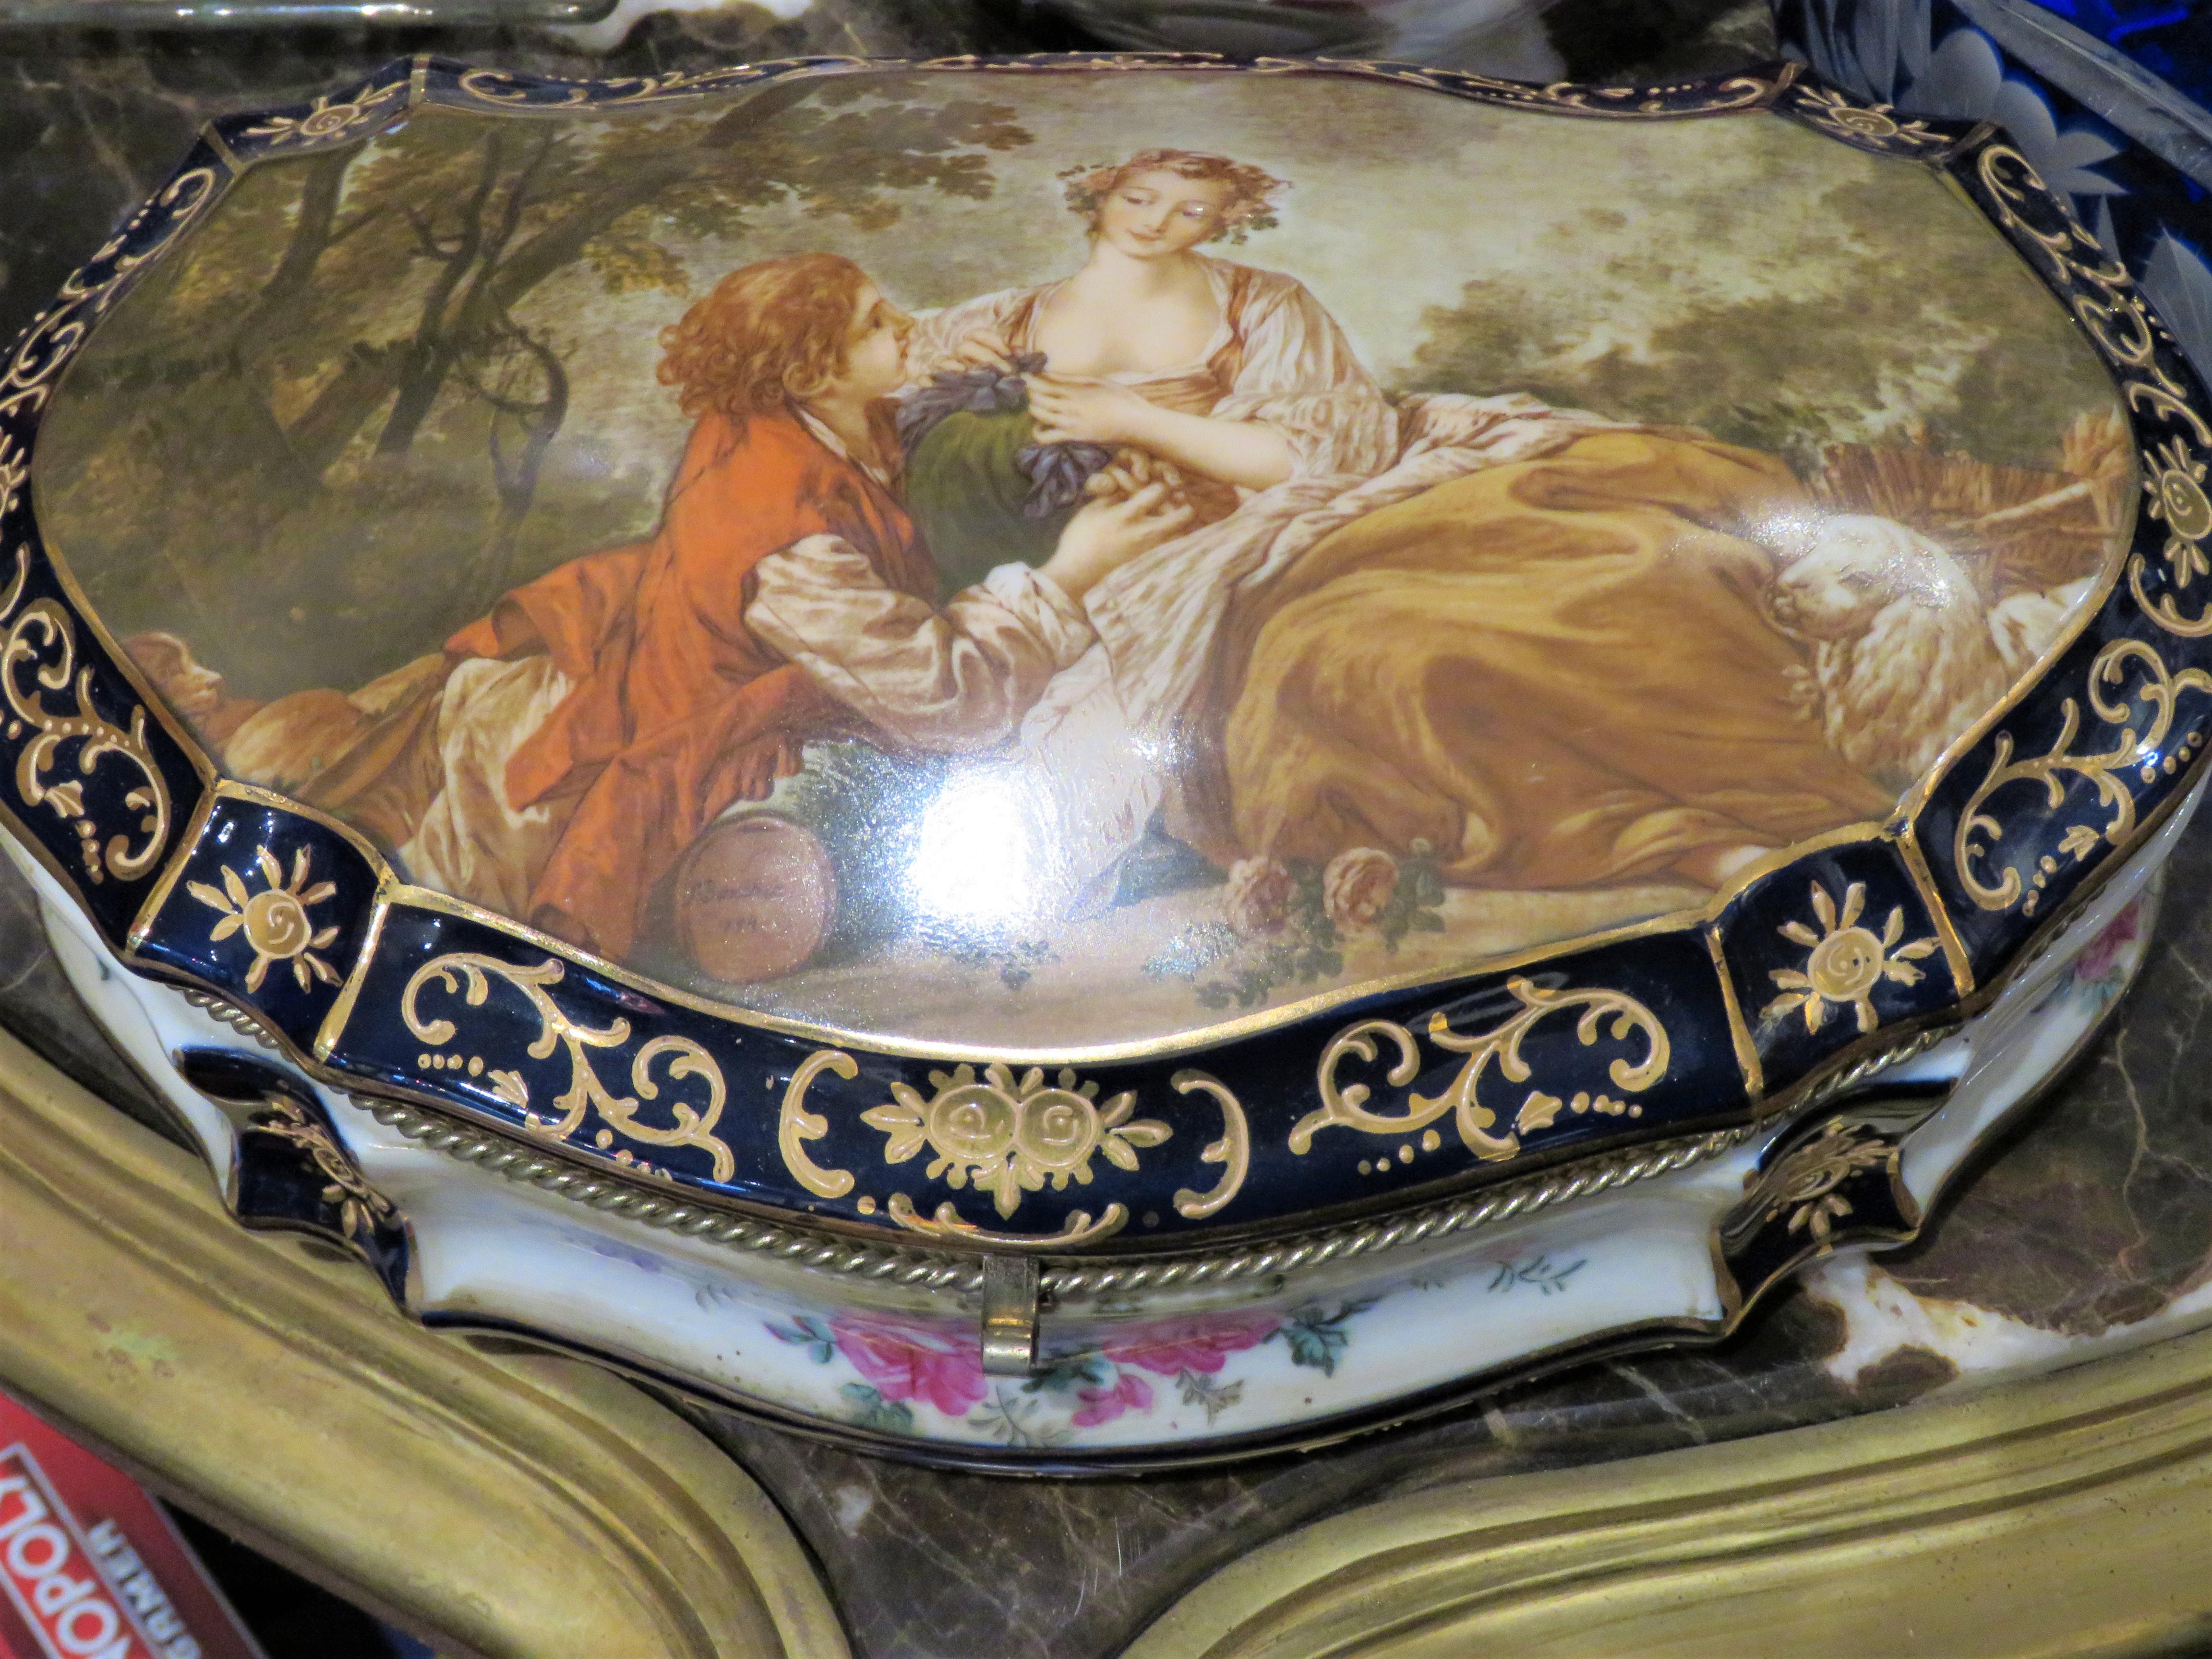 The Following Items we are offering is a Magnificent Rare Jewelry Casket Box Sevres Porcelain with Gilt Bronze Mounting. Center of Box Top is Finely Detailed with a Beautiful Portrait of Young Lovers. Taken out of an Important New York City Sutton